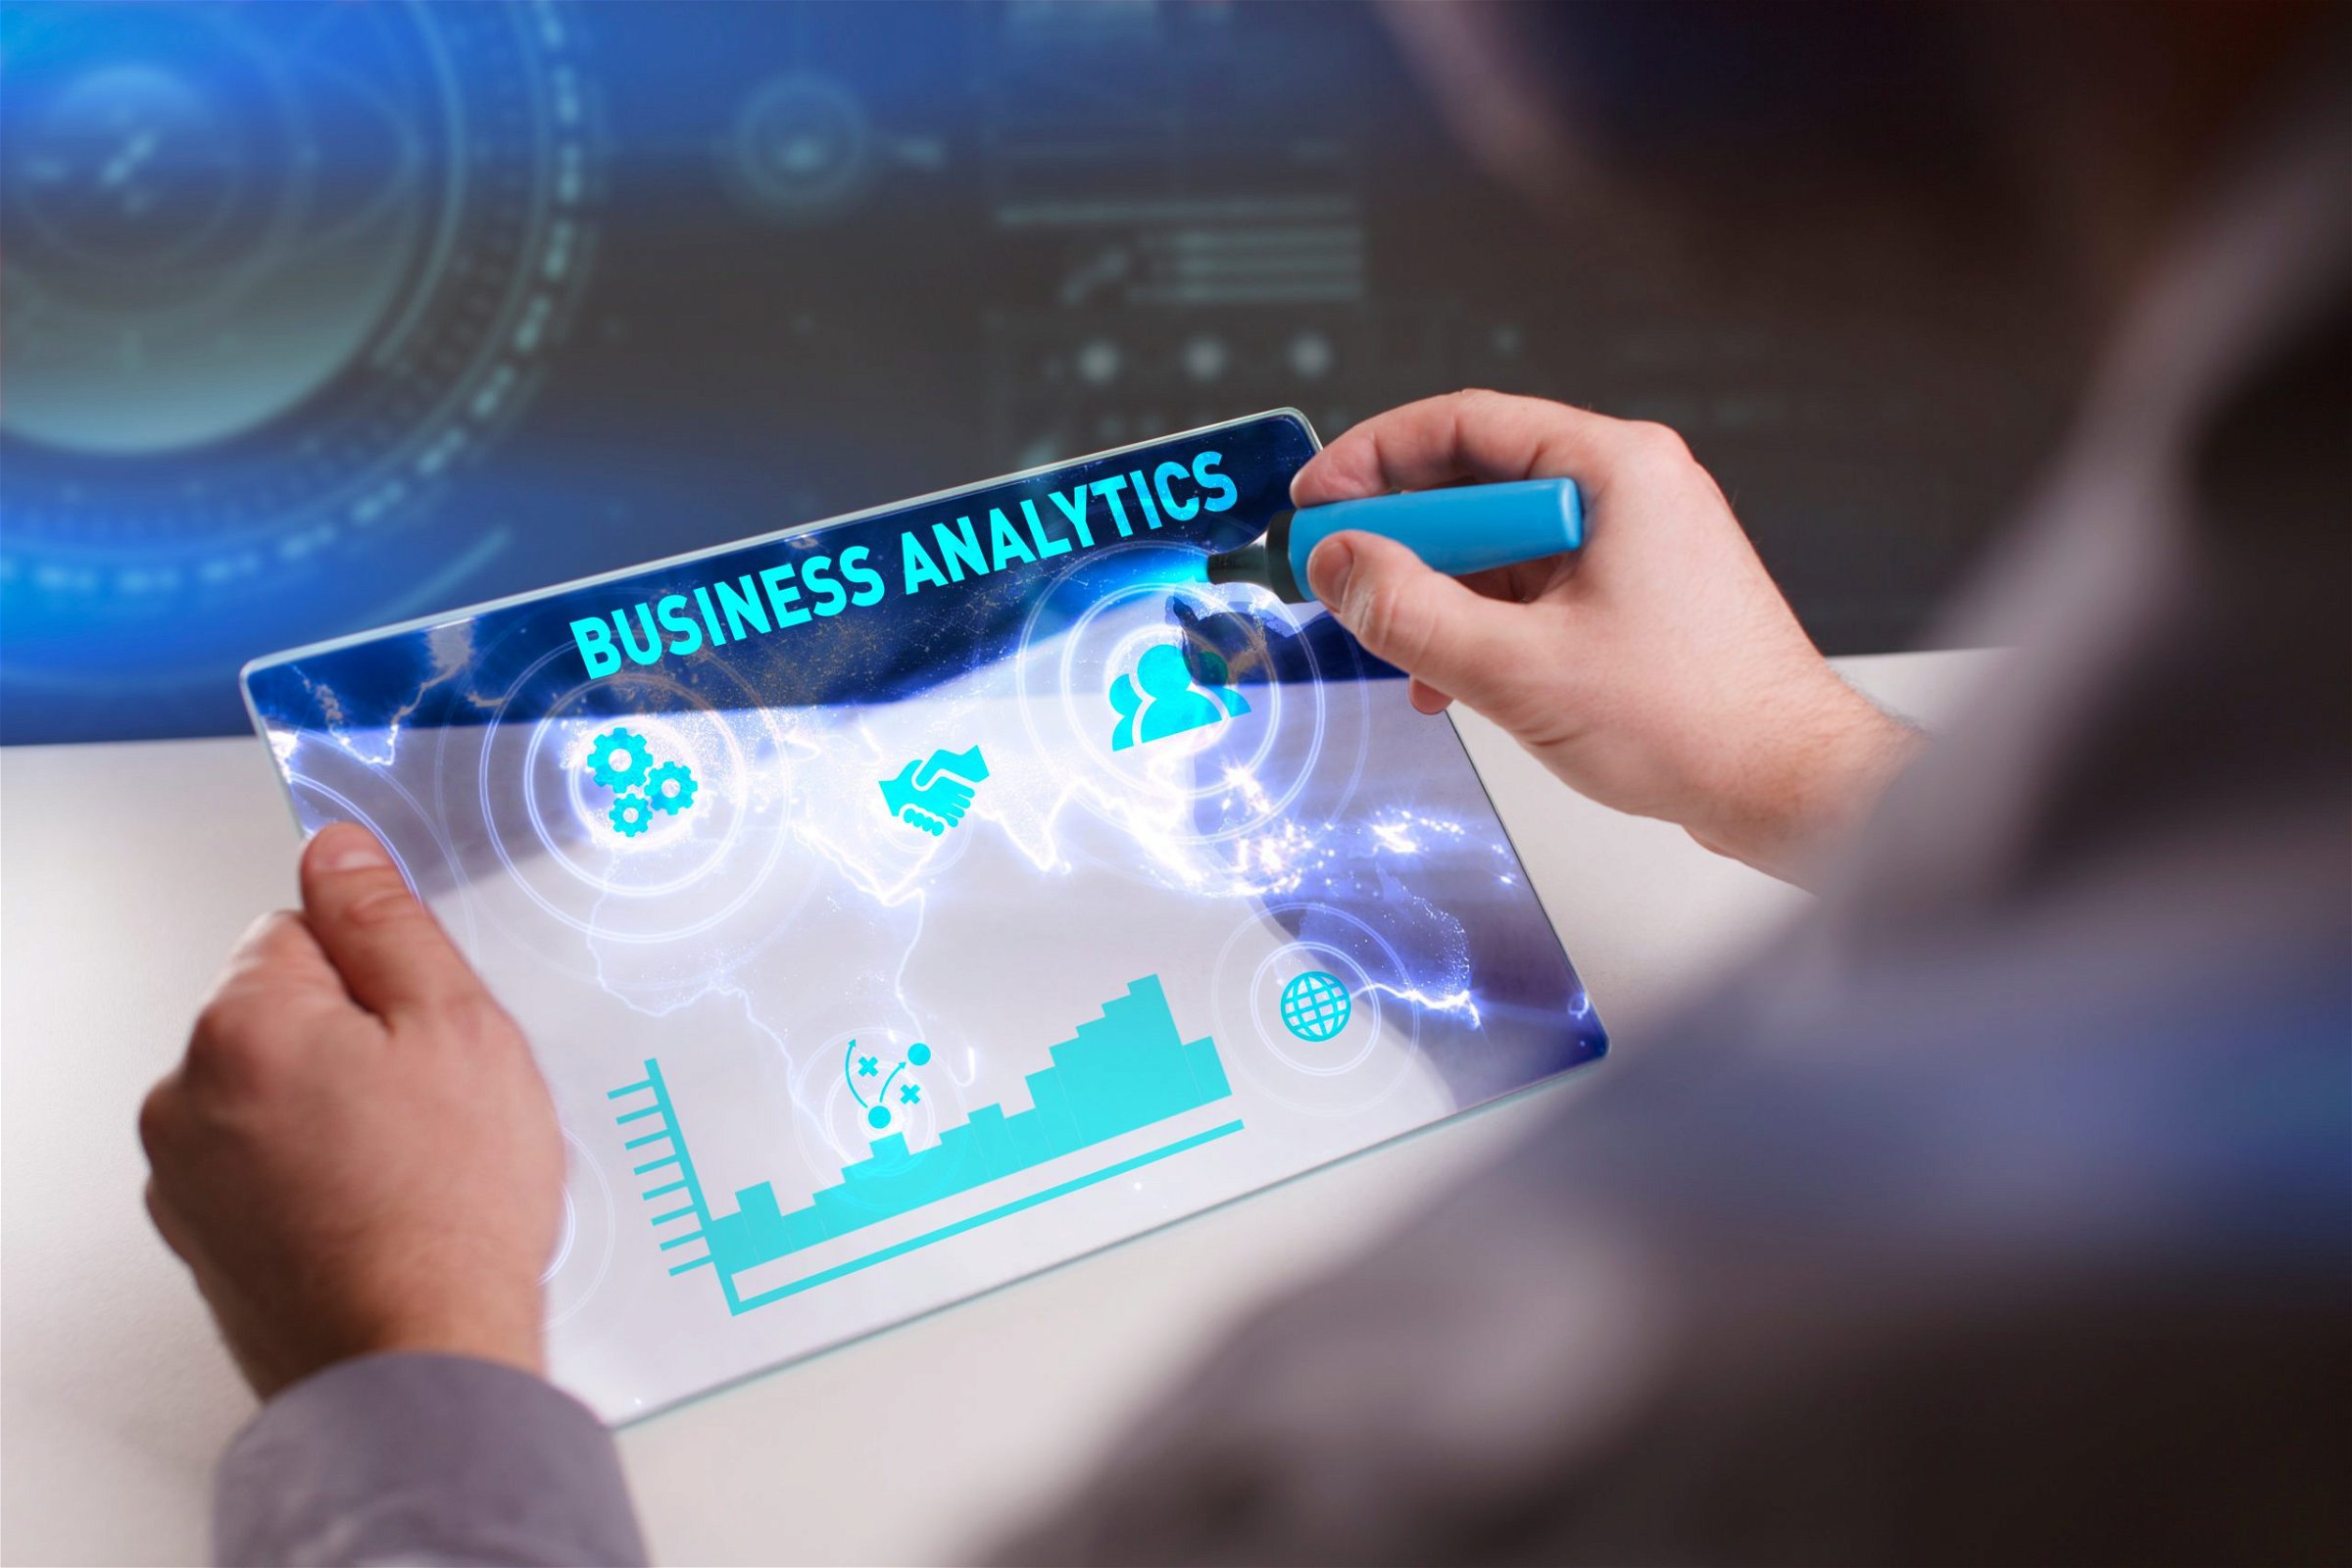 How Do Business Analytics & Data Analytics Differ? What Are Their Applications?